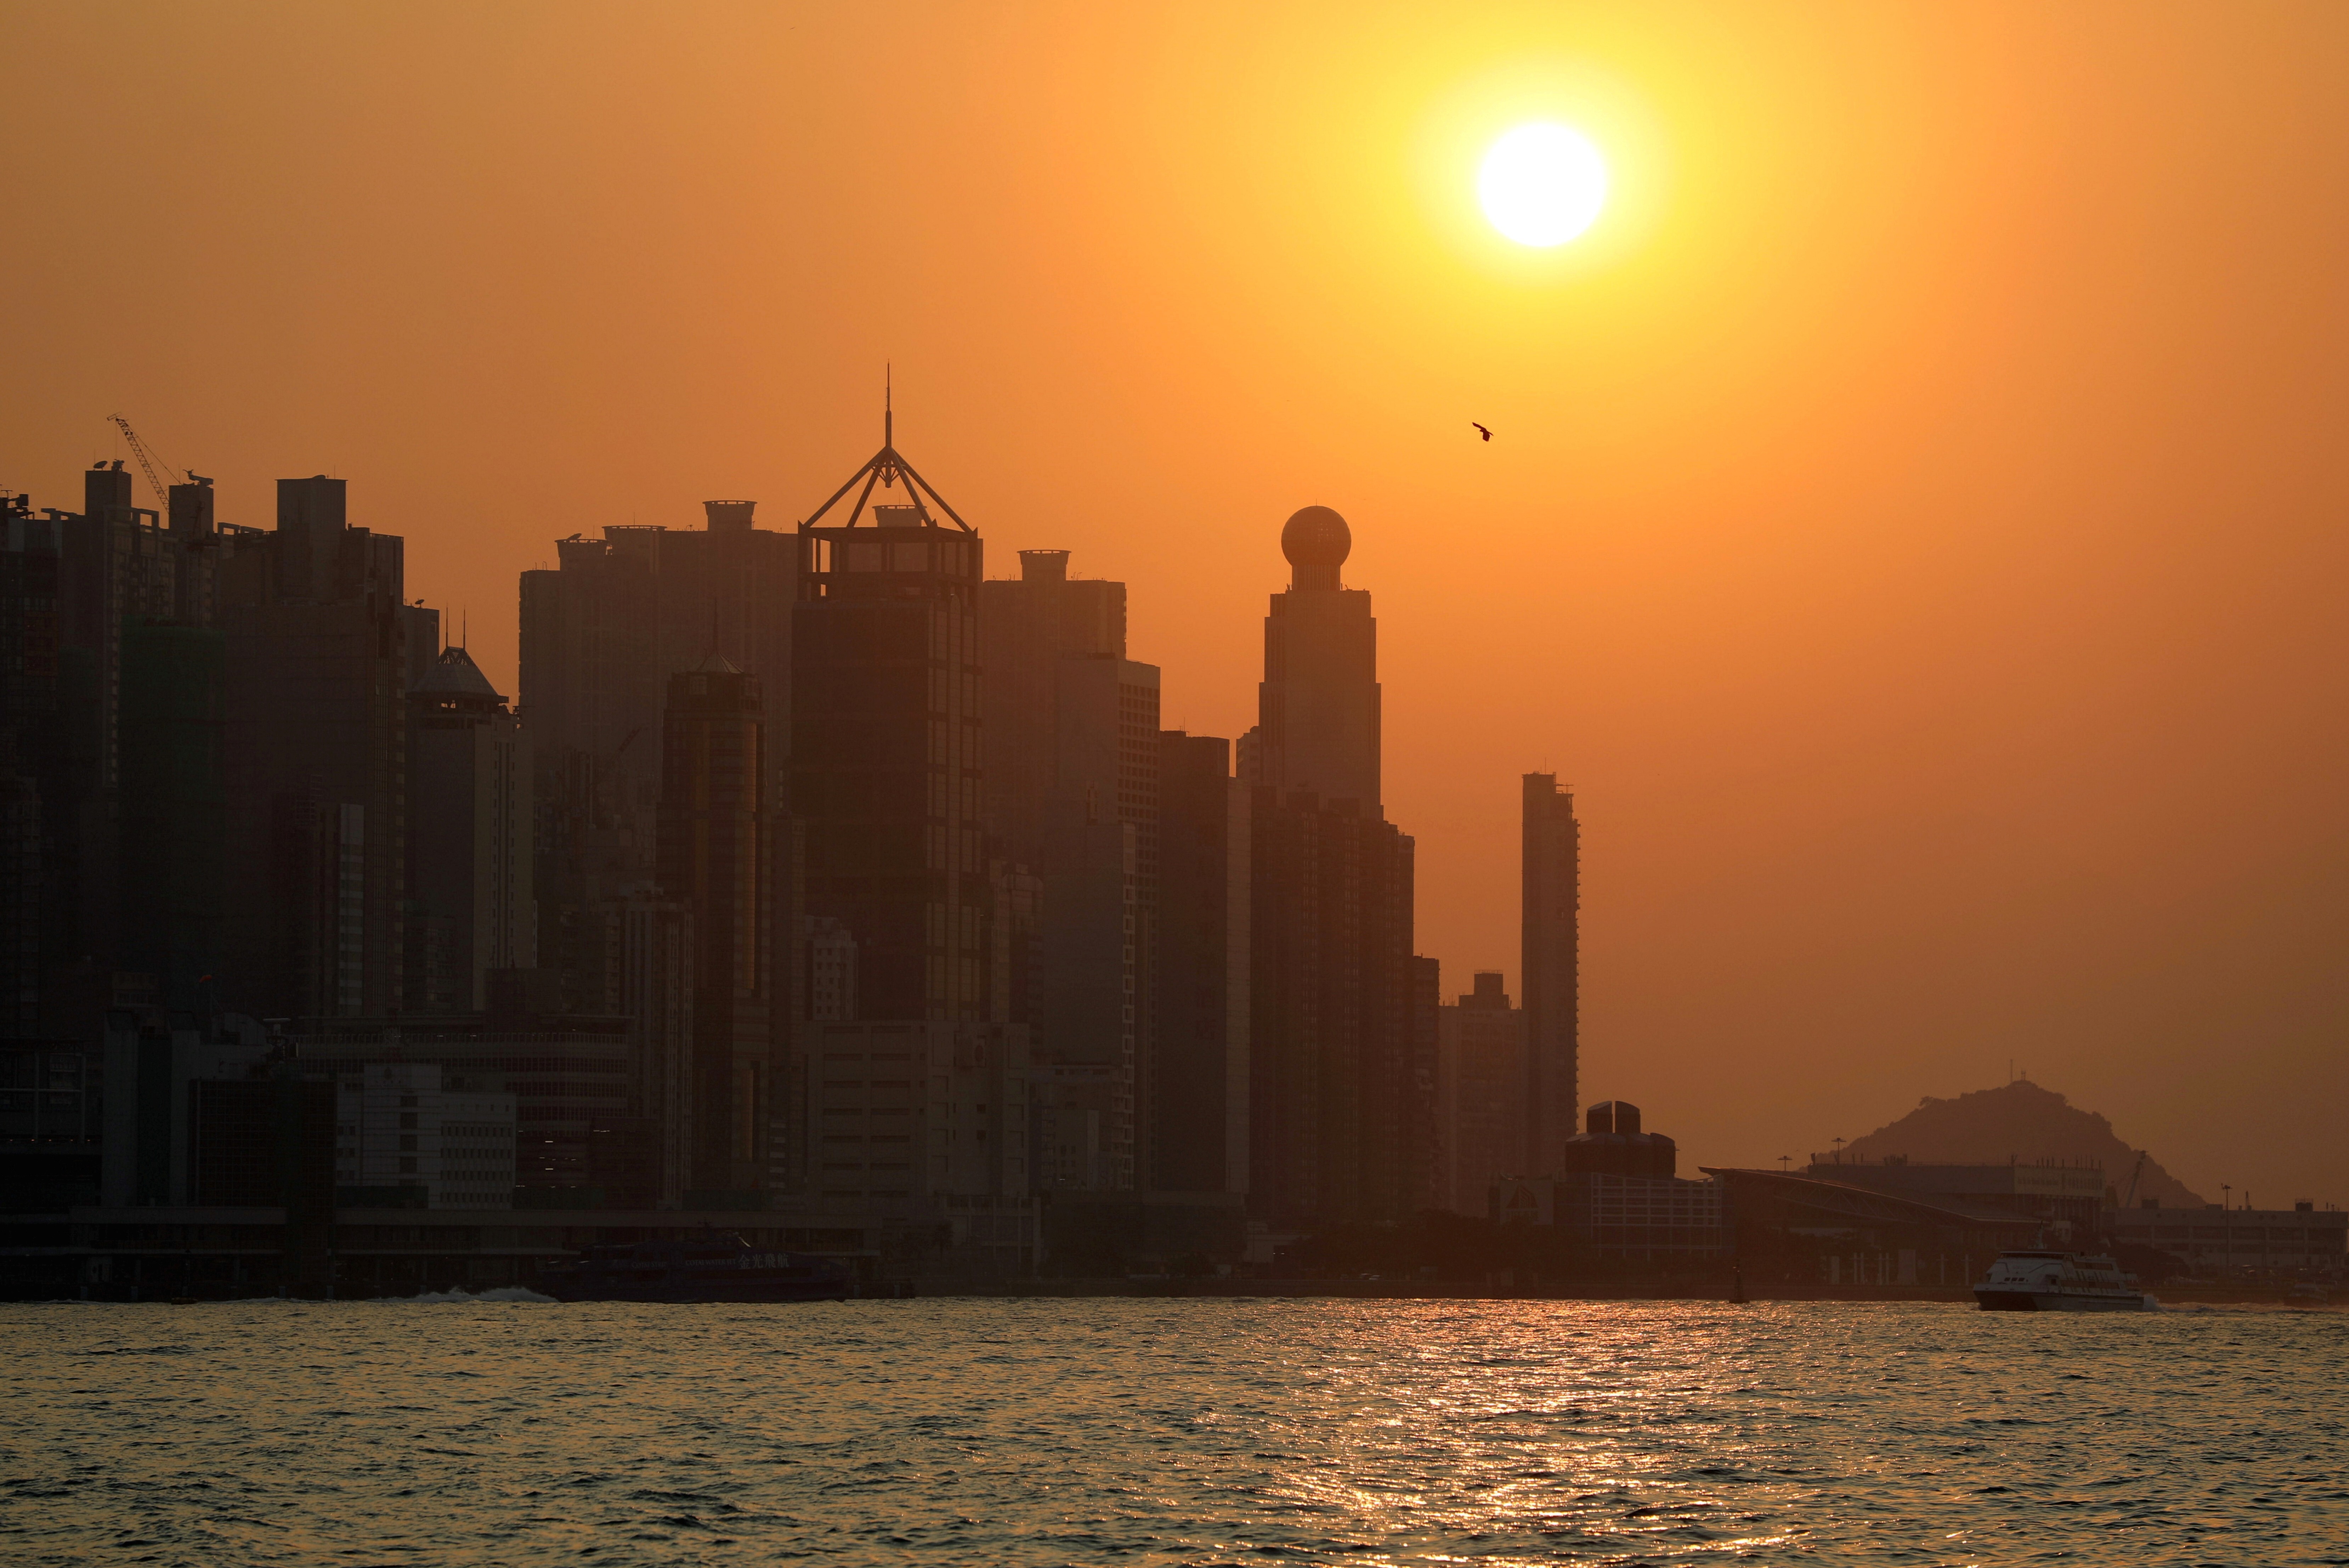 The Hong Kong skyline is seen at sunset in October last year. As a global financial centre, Hong Kong’s banking sector assets and liabilities extend far beyond the local economy. Photo: Reuters